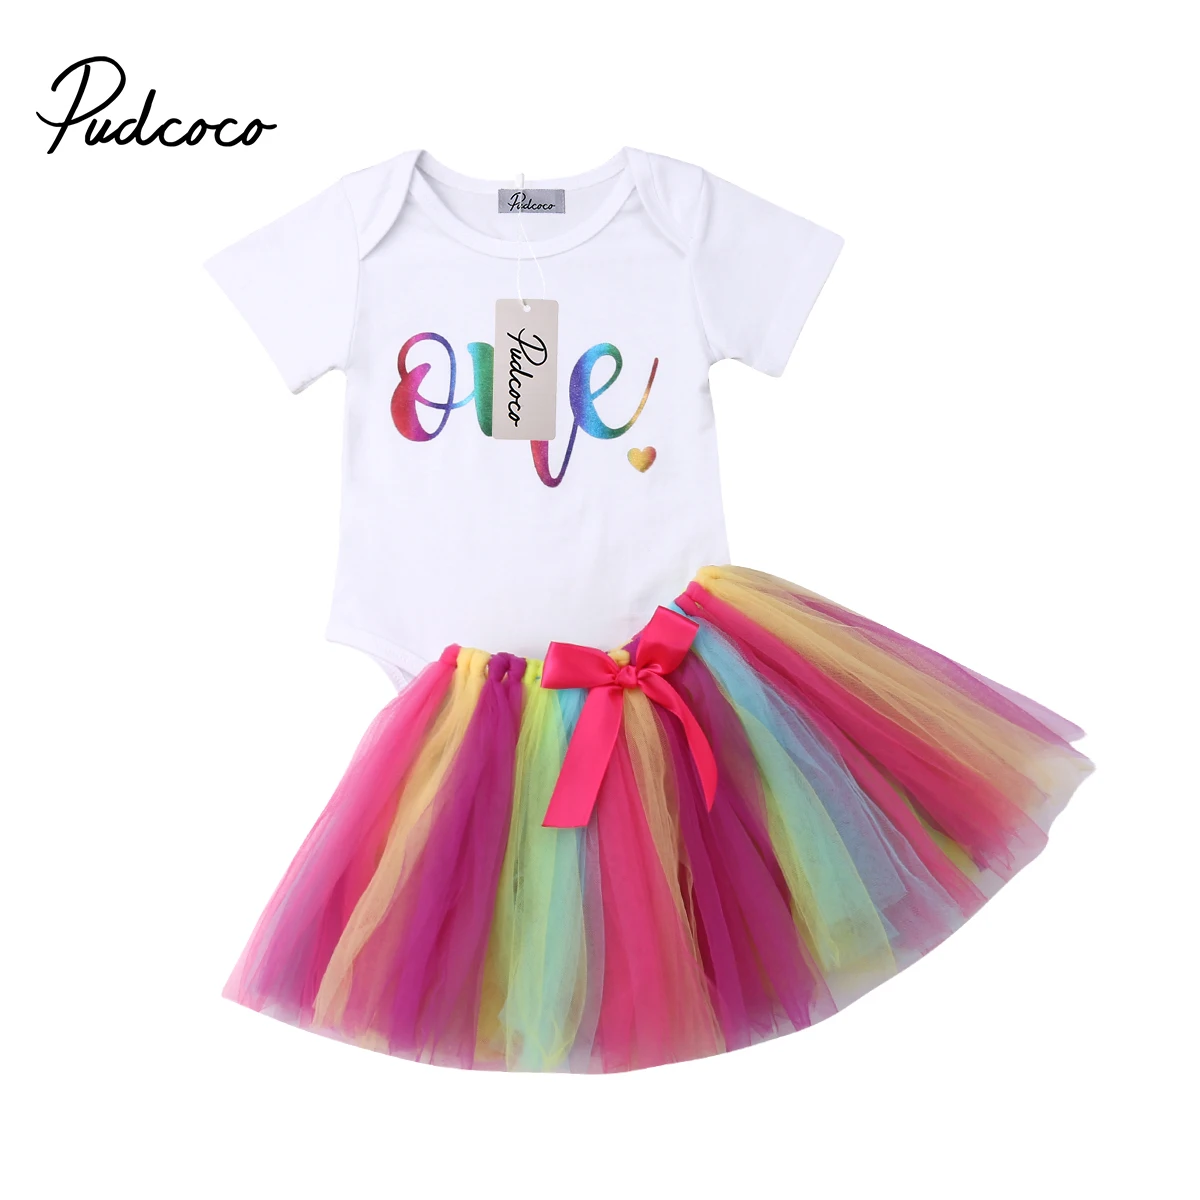 

Pudcoco Toddler Baby Girls 1st Birthday Romper Bodysuit Tulle Tutu Skirt Dress Outfits Costume Clothes 0-18M